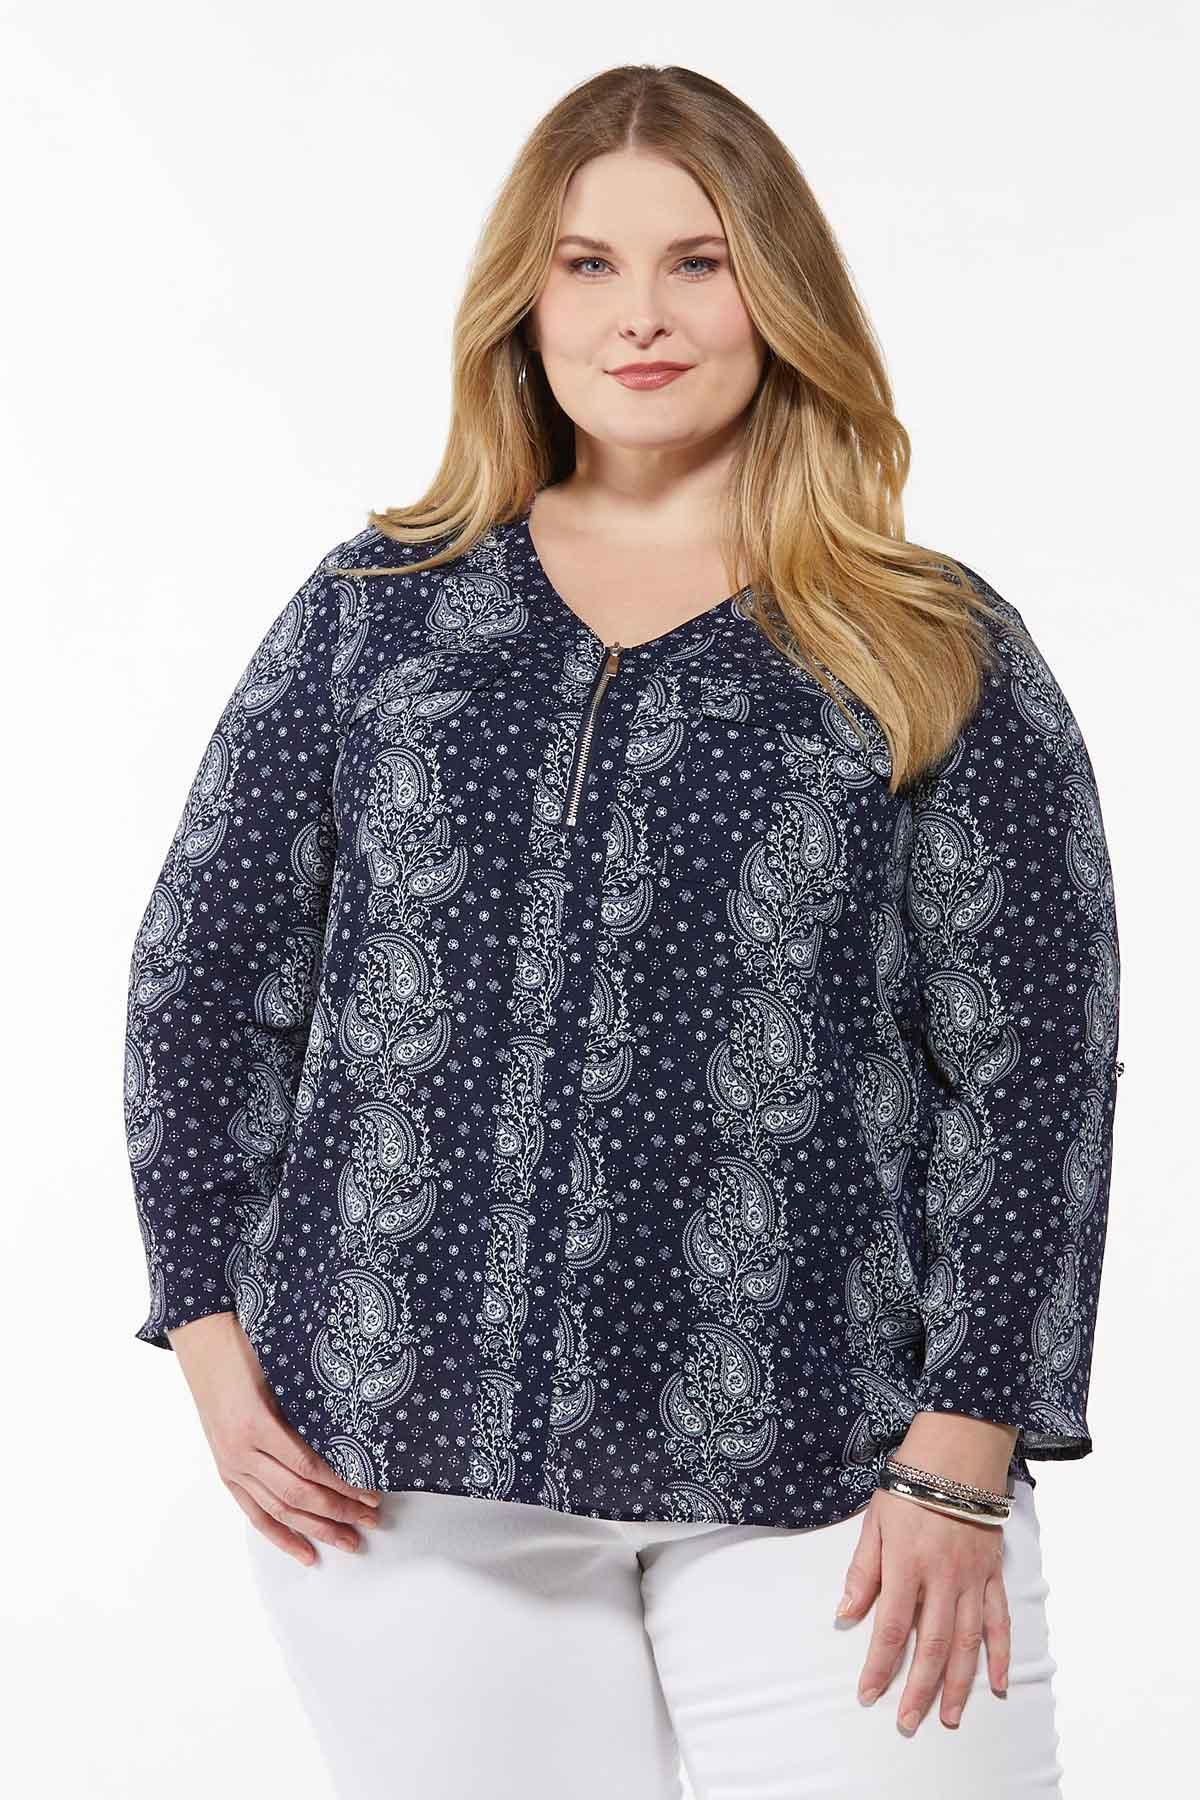 Plus Size Zip Front Equipment Top | Cato Fashions